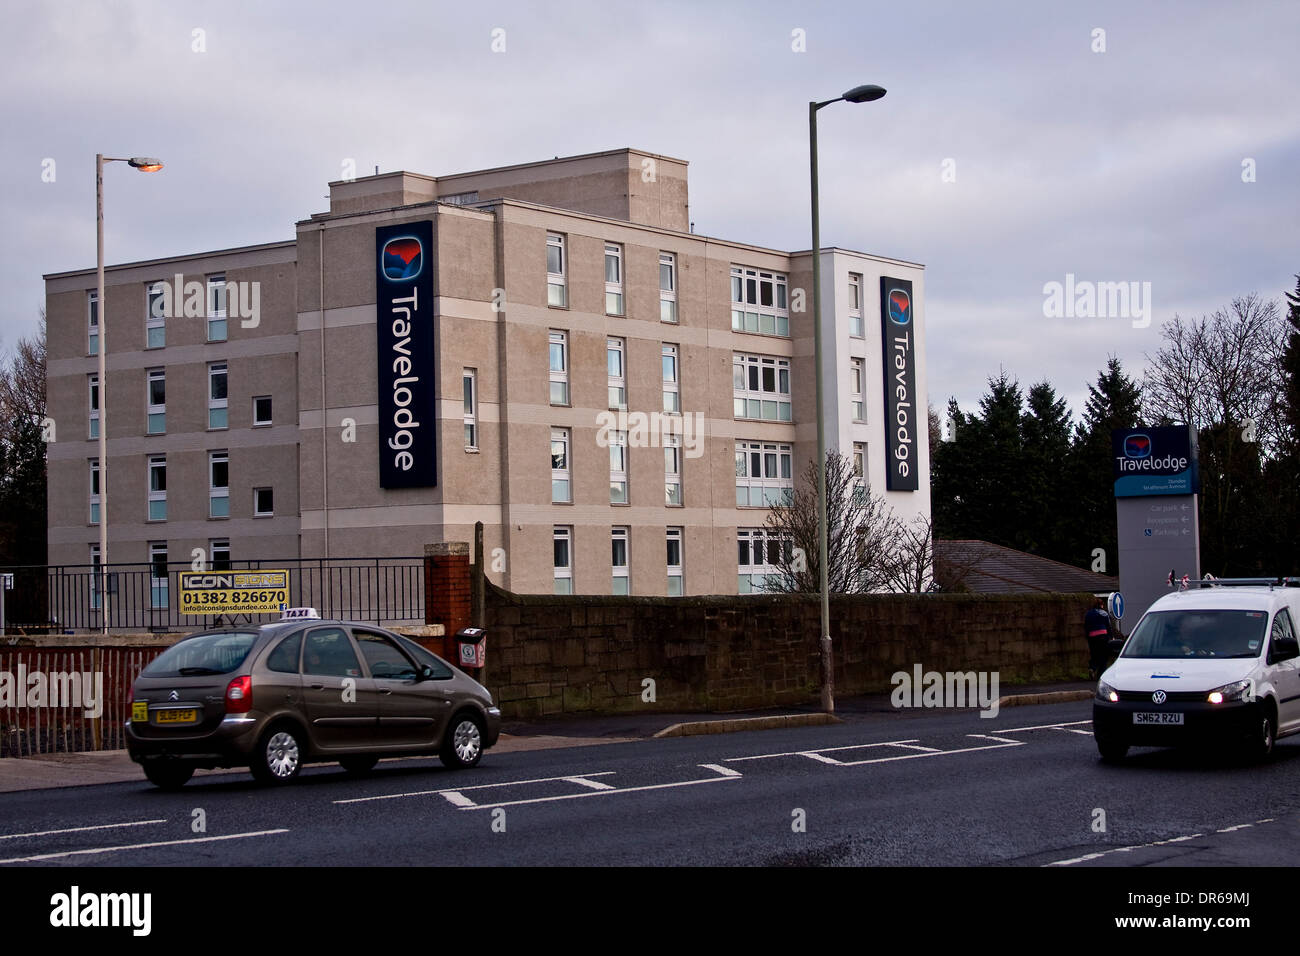 Travelodge is a Budget hotel situated along Strathmore Avenue in Dundee, UK Stock Photo